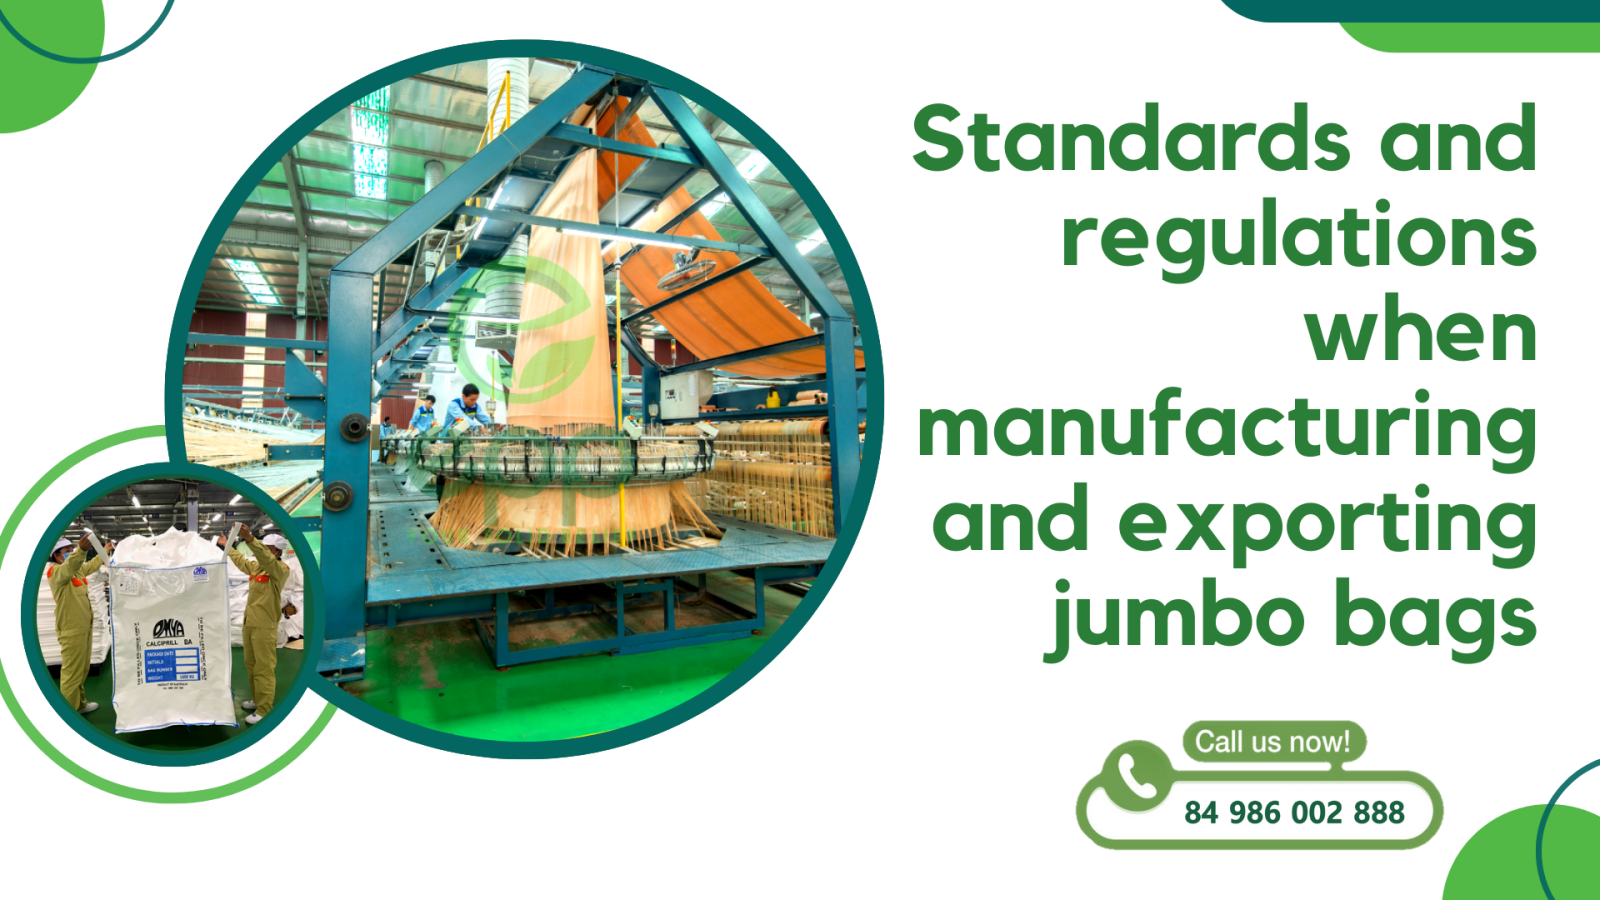 Standards-and-regulations-when-manufacturing-and-exporting-jumbo-bags.png